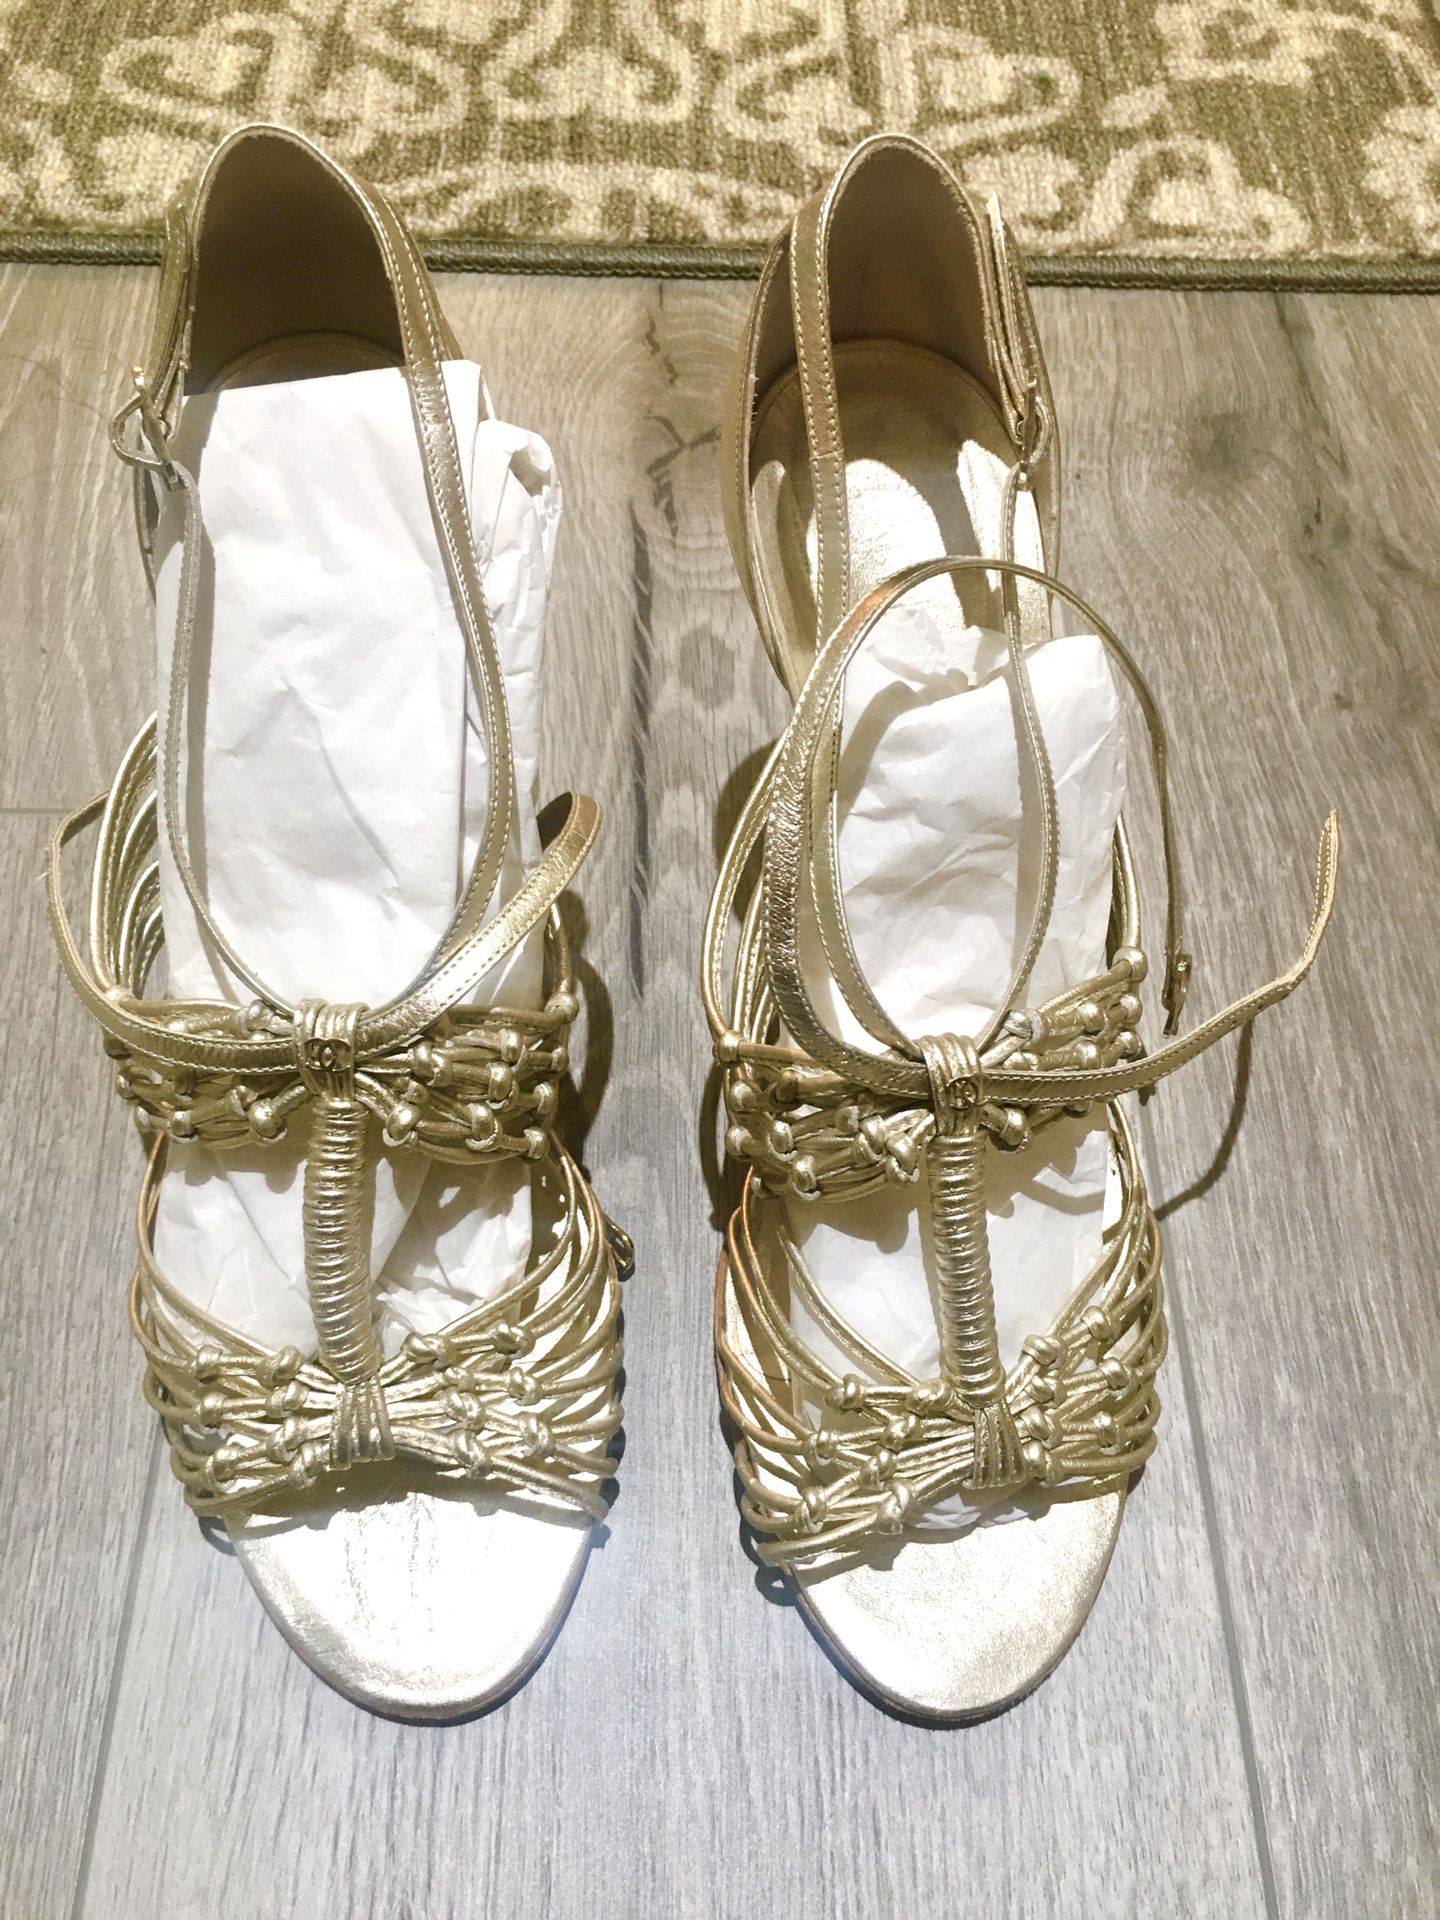 100% Authentic Chanel Gold heels